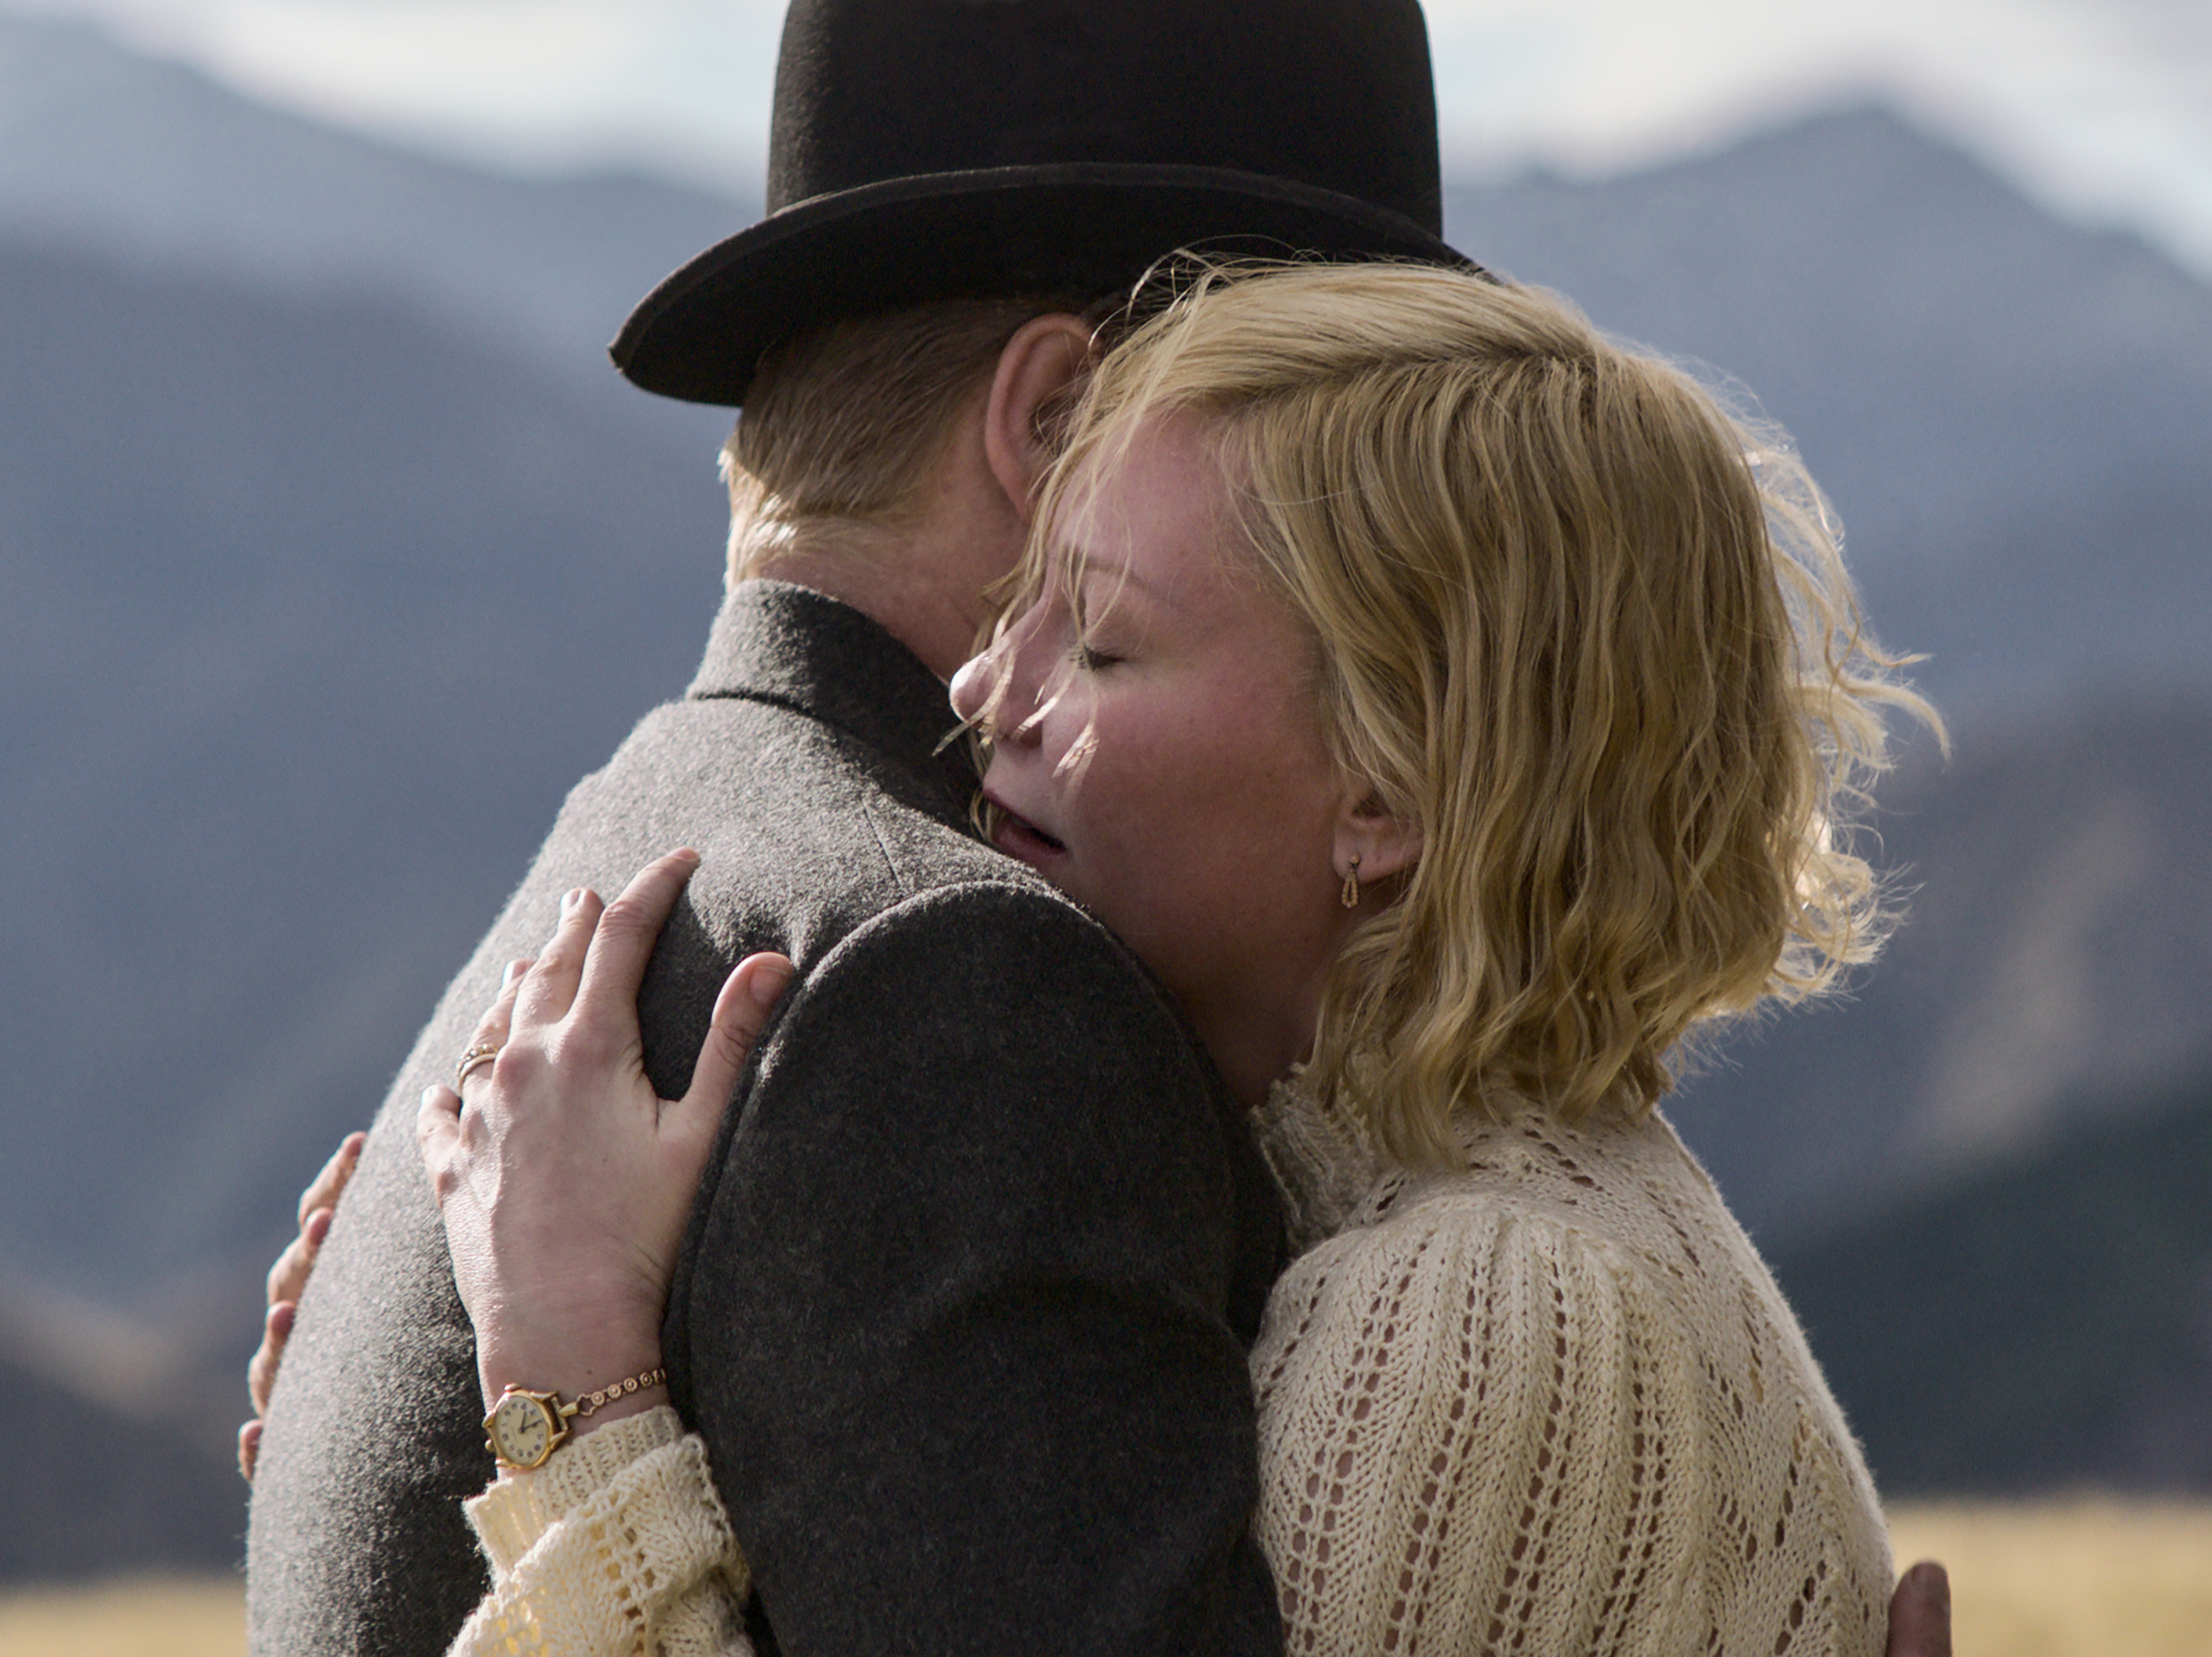 Rose (Dunst) embraces George Burbank, played by real-life husband Jesse Plemons, in ‘The Power of the Dog’